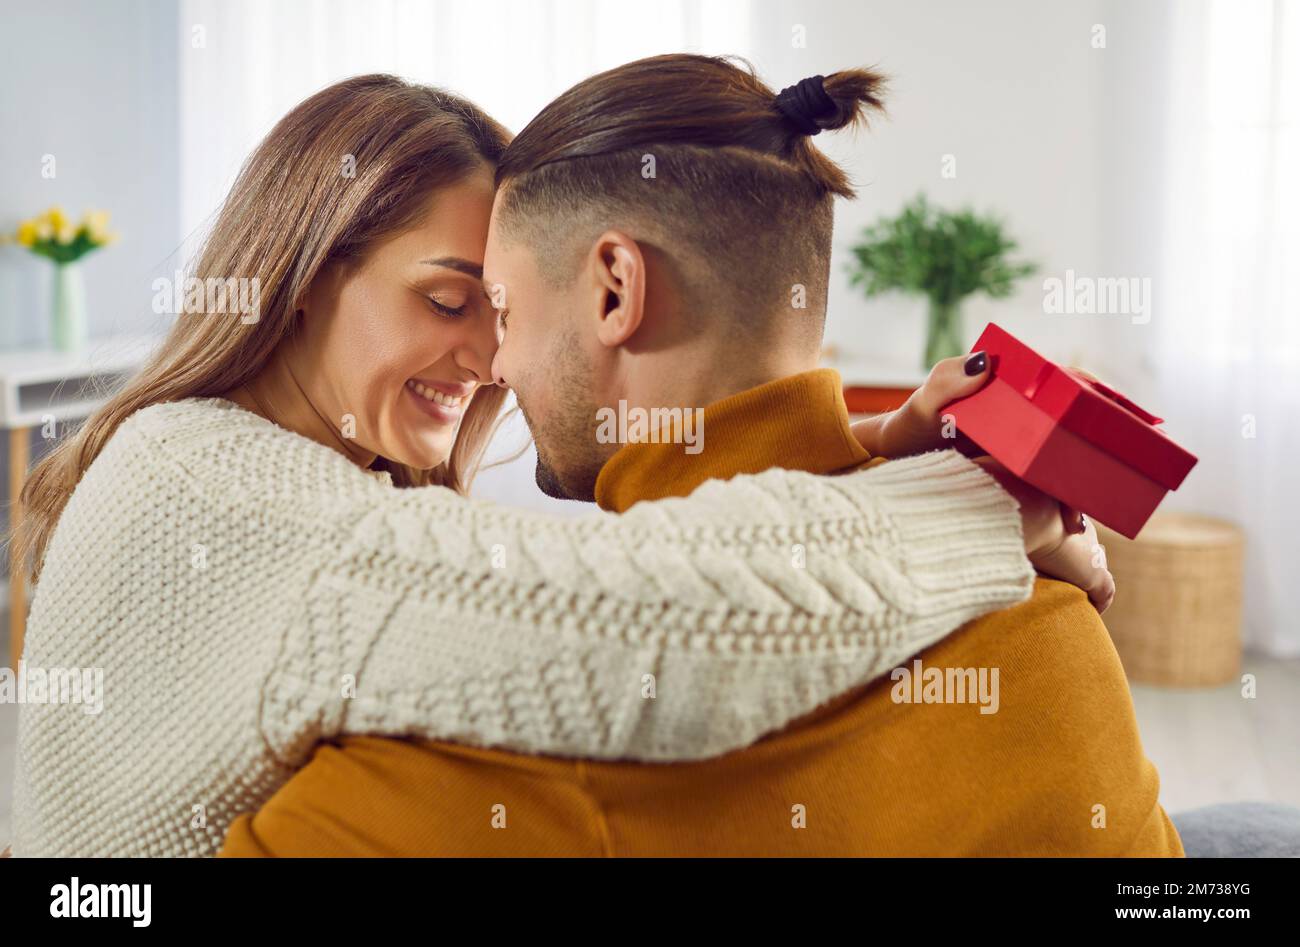 Happy couple in love celebrating Valentine's Day, hugging, kissing, giving each other presents Stock Photo